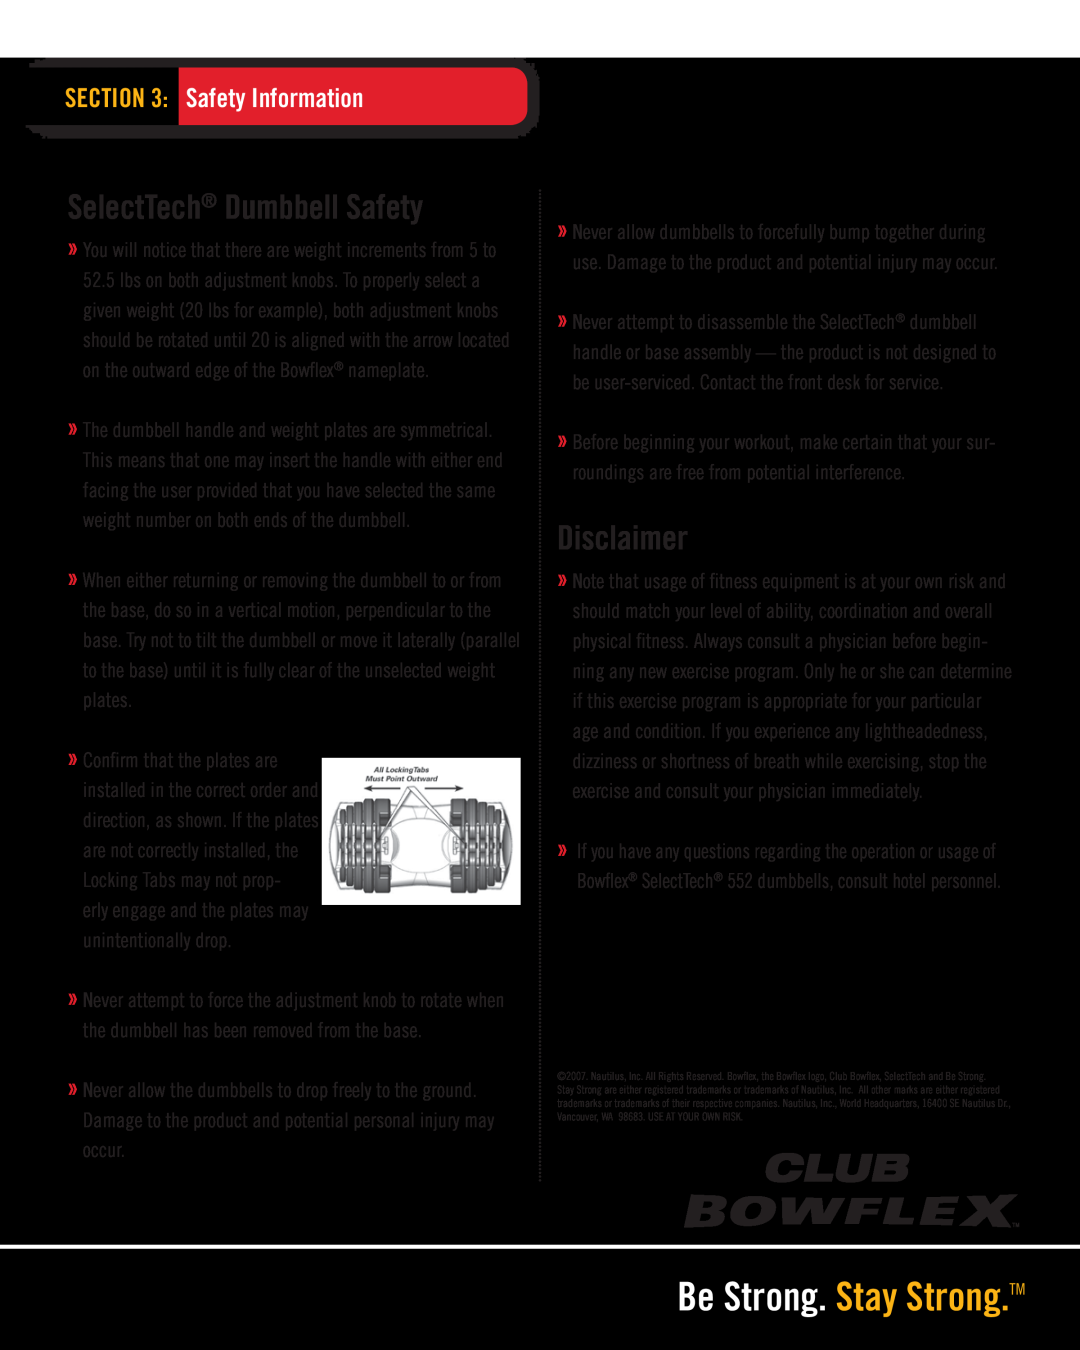 Bowflex 552 manual Safety Information, SelectTech Dumbbell Safety, Disclaimer, Be Strong. Stay Strong.TM 